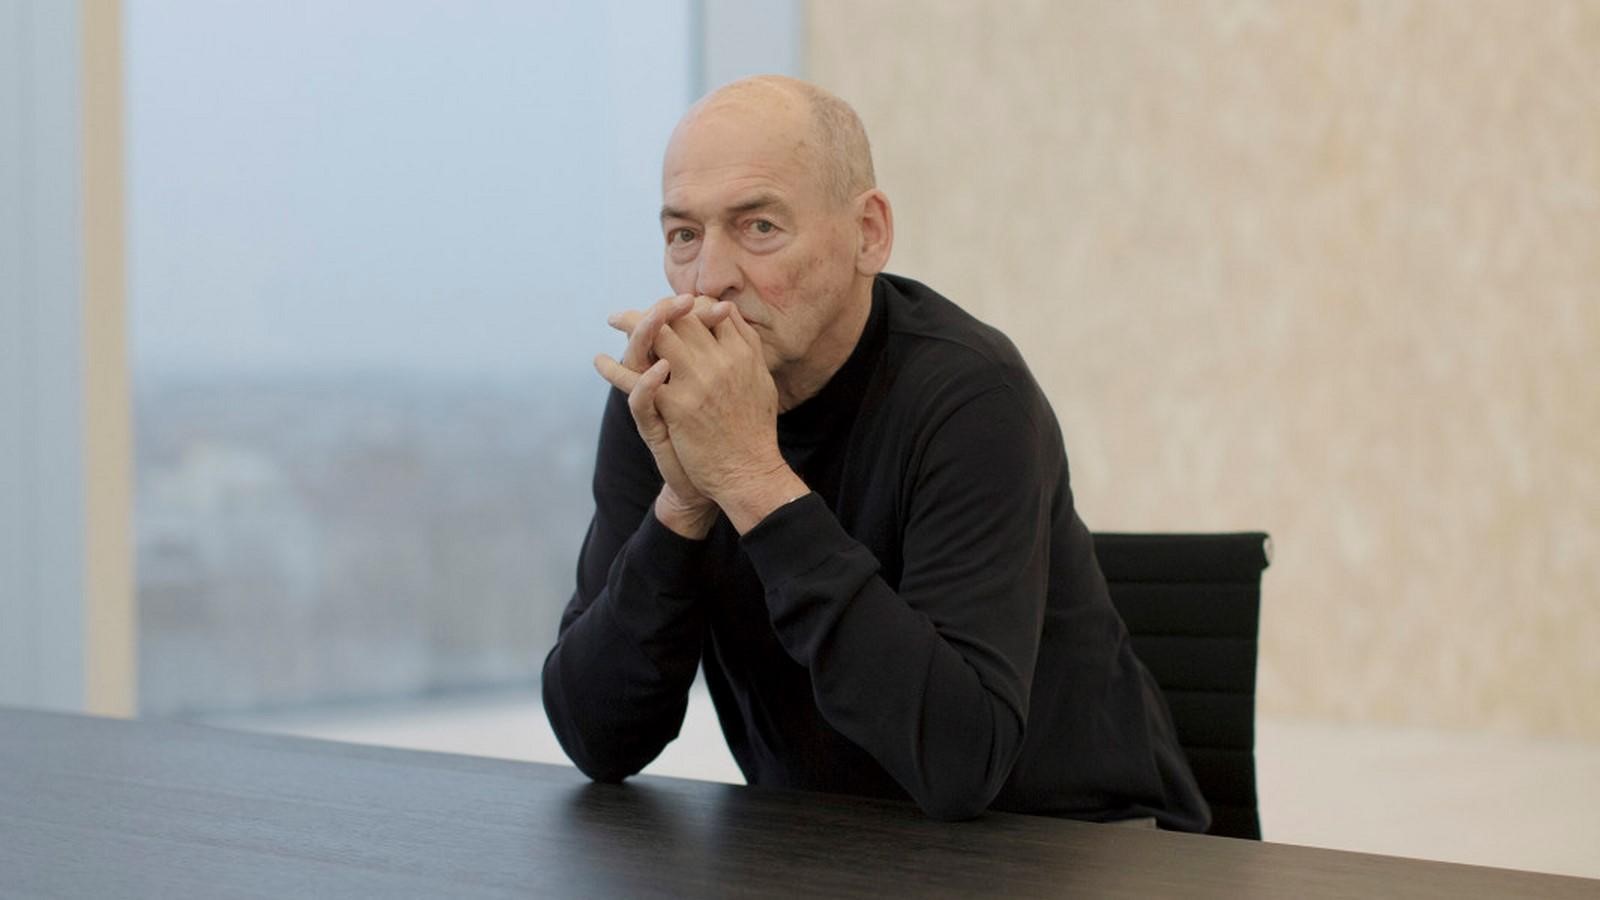 Rem Koolhaas - Globally Renowned "Starchitect" - Sheet2